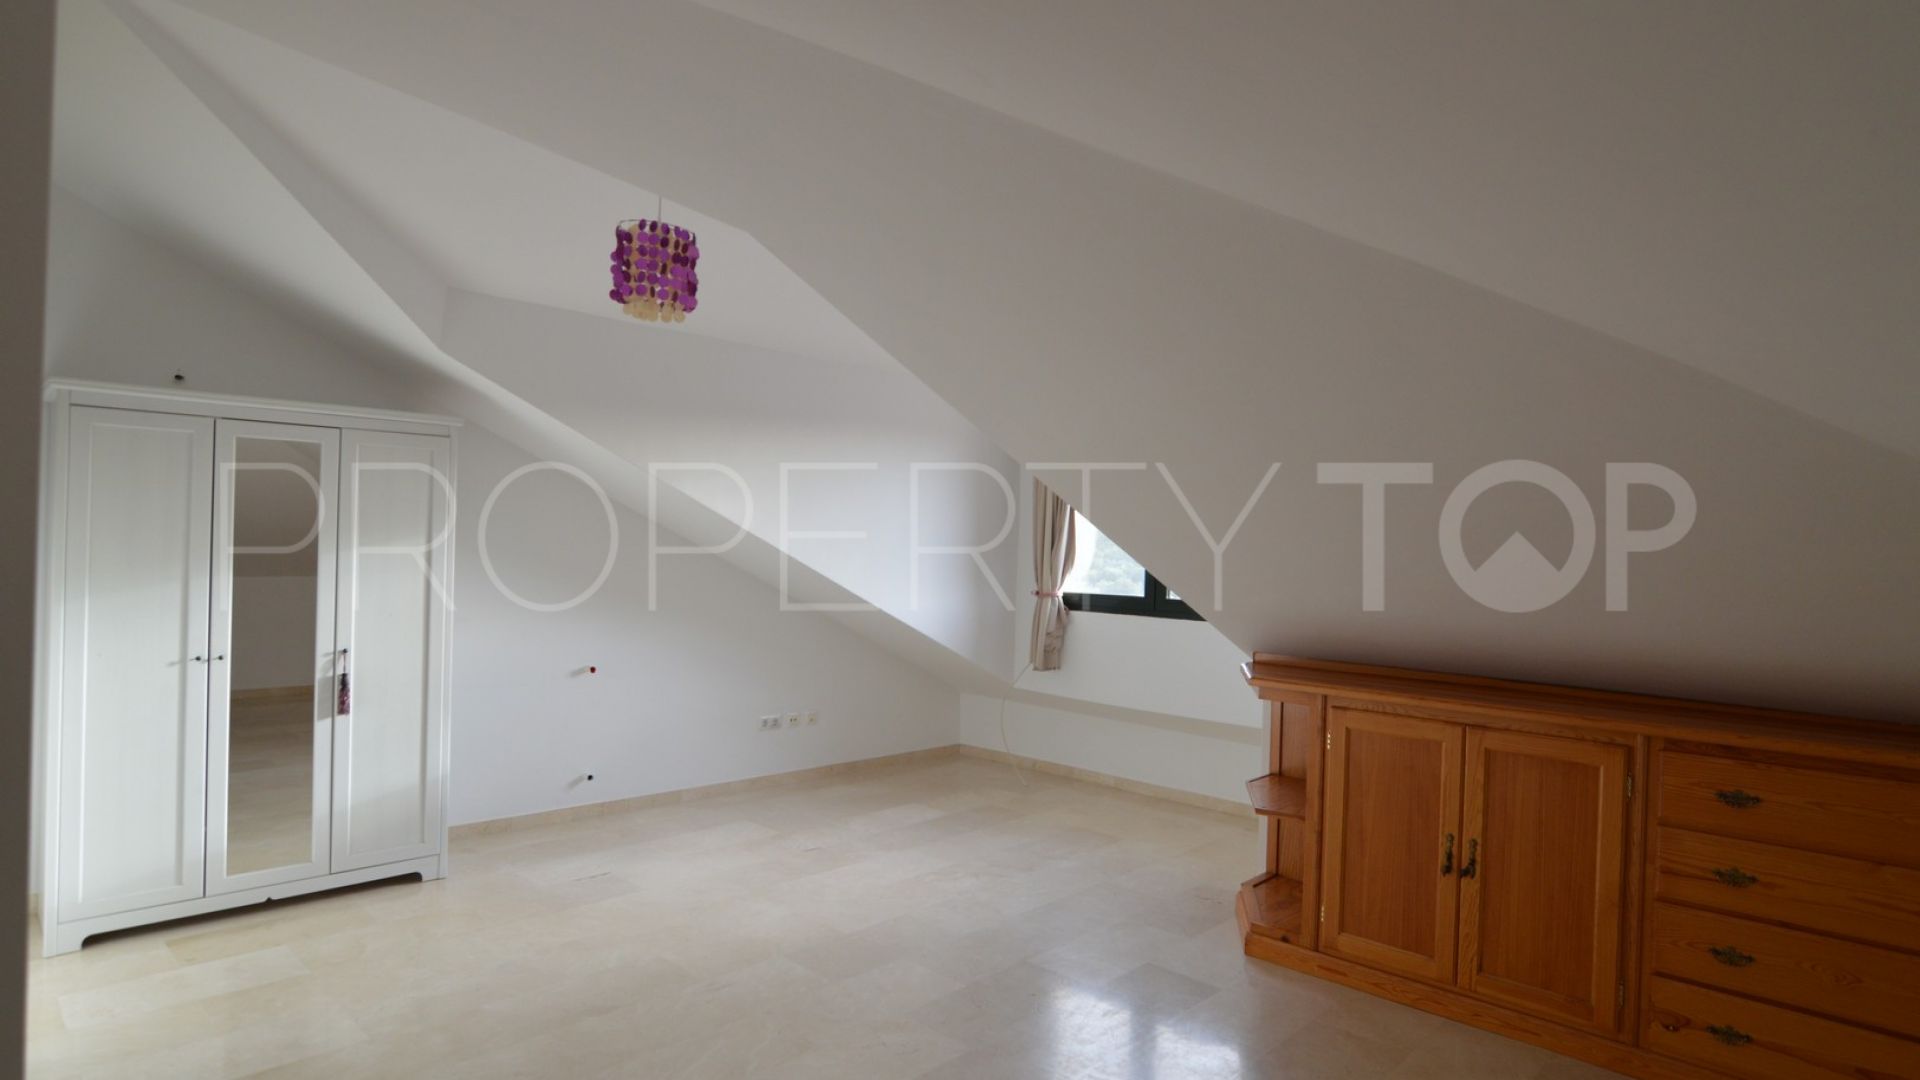 For sale Sotogolf 4 bedrooms town house